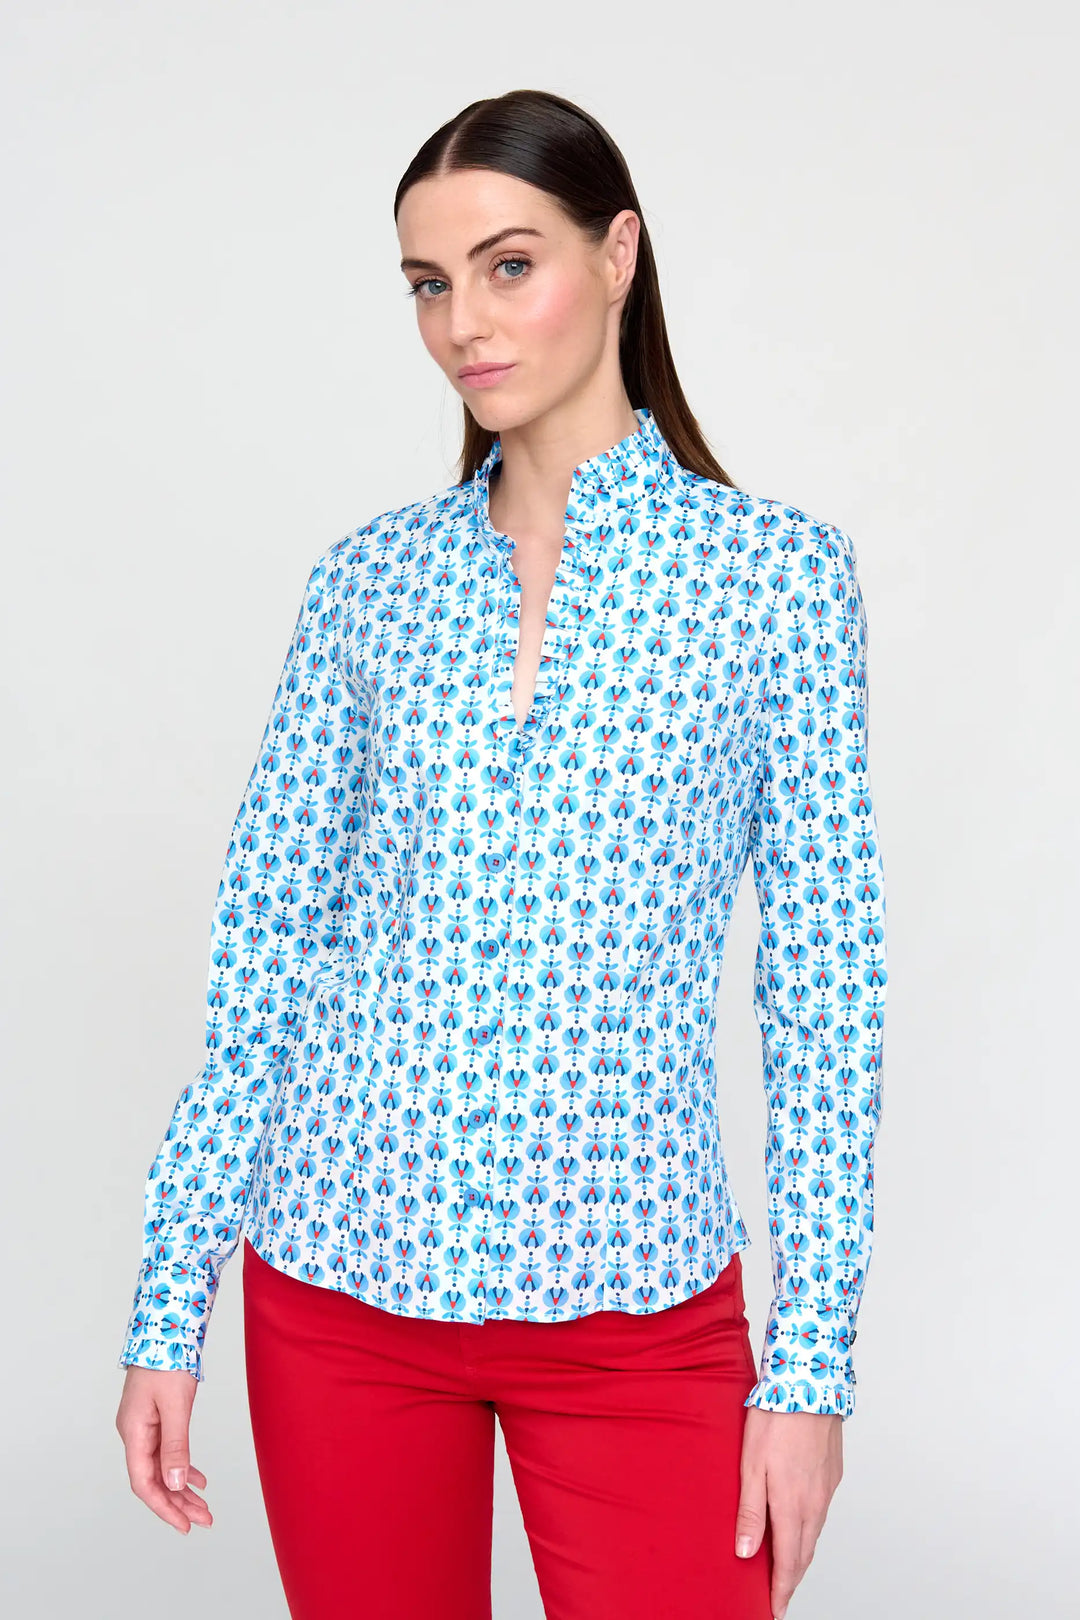 A model wearing the 'Luque' style blouse, adorned with a blue floral print, long sleeves, and a V-neck, complemented by red trousers.